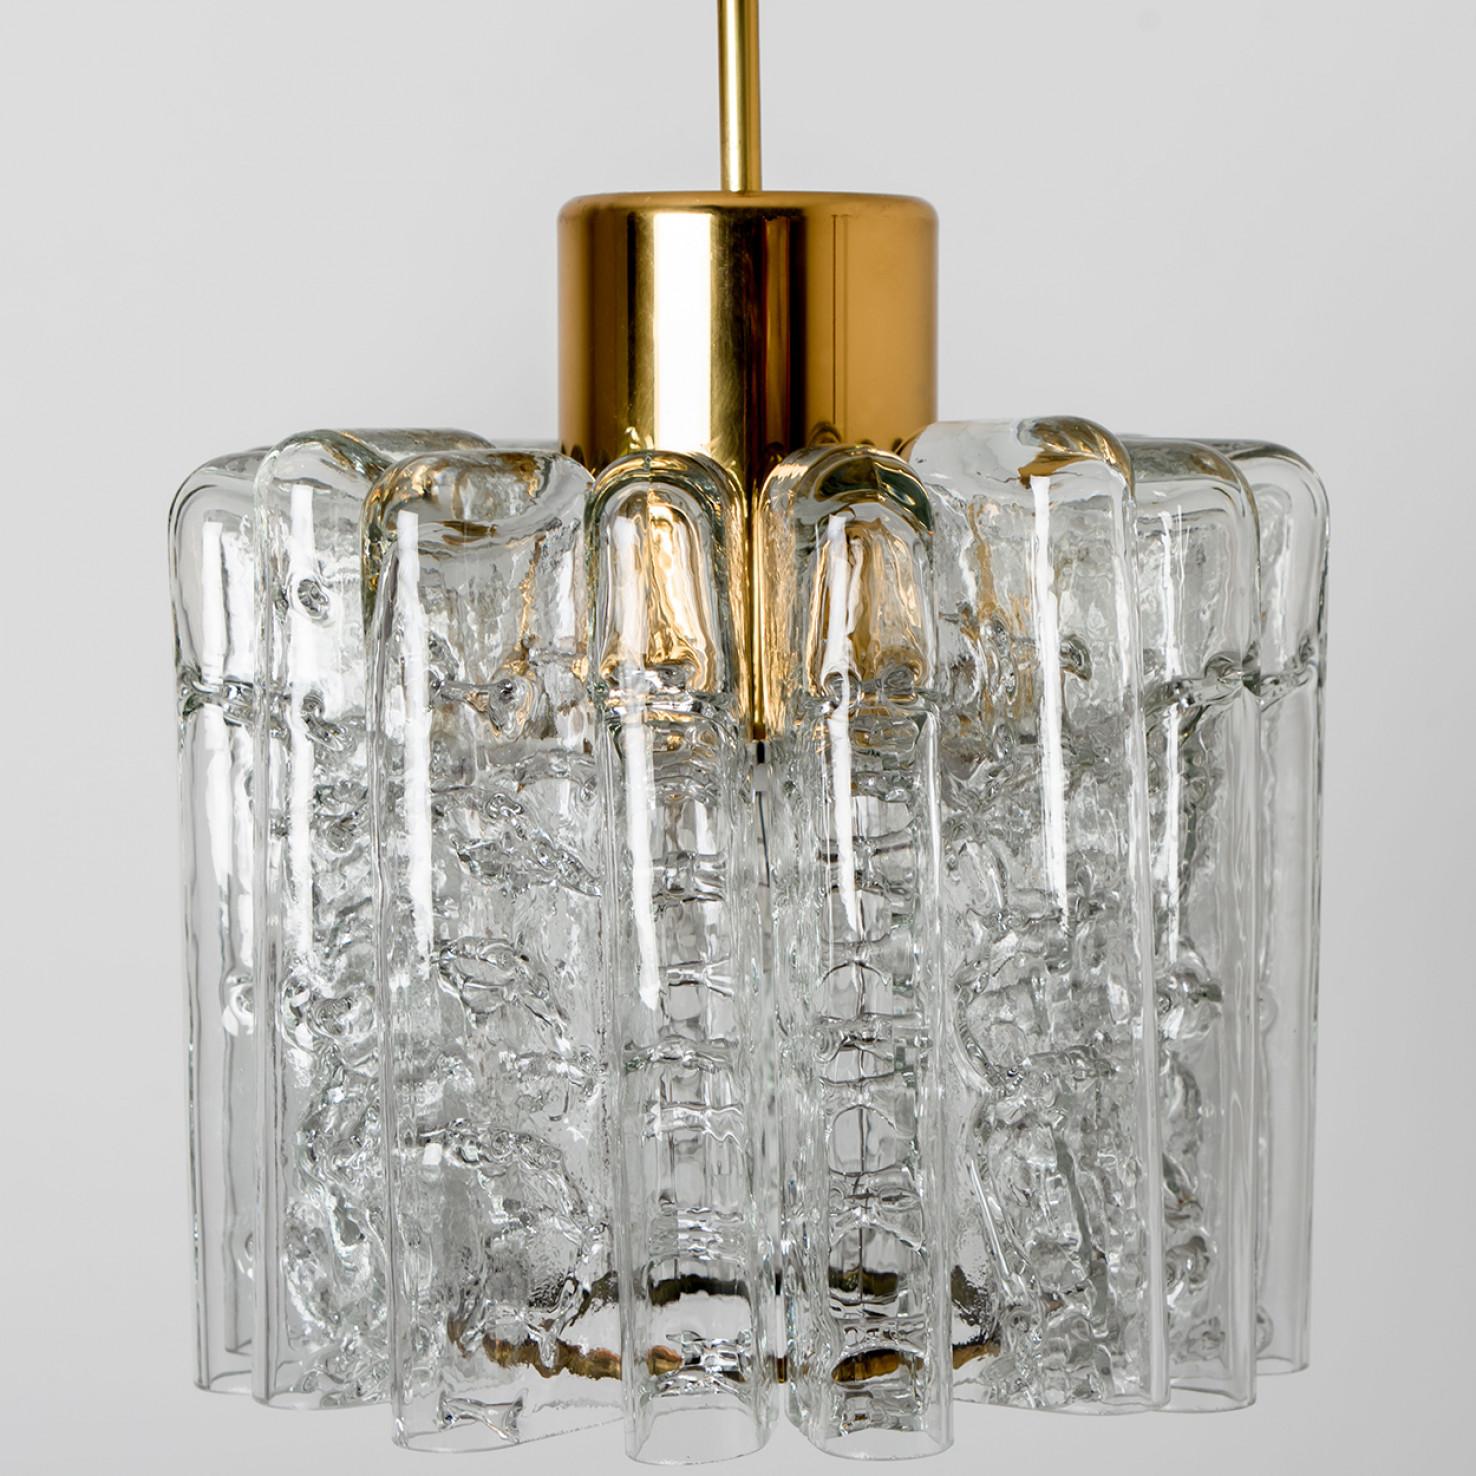 1 of the 2 Round Textured Clear Glass Doria Pendant Lamp, 1960s For Sale 3